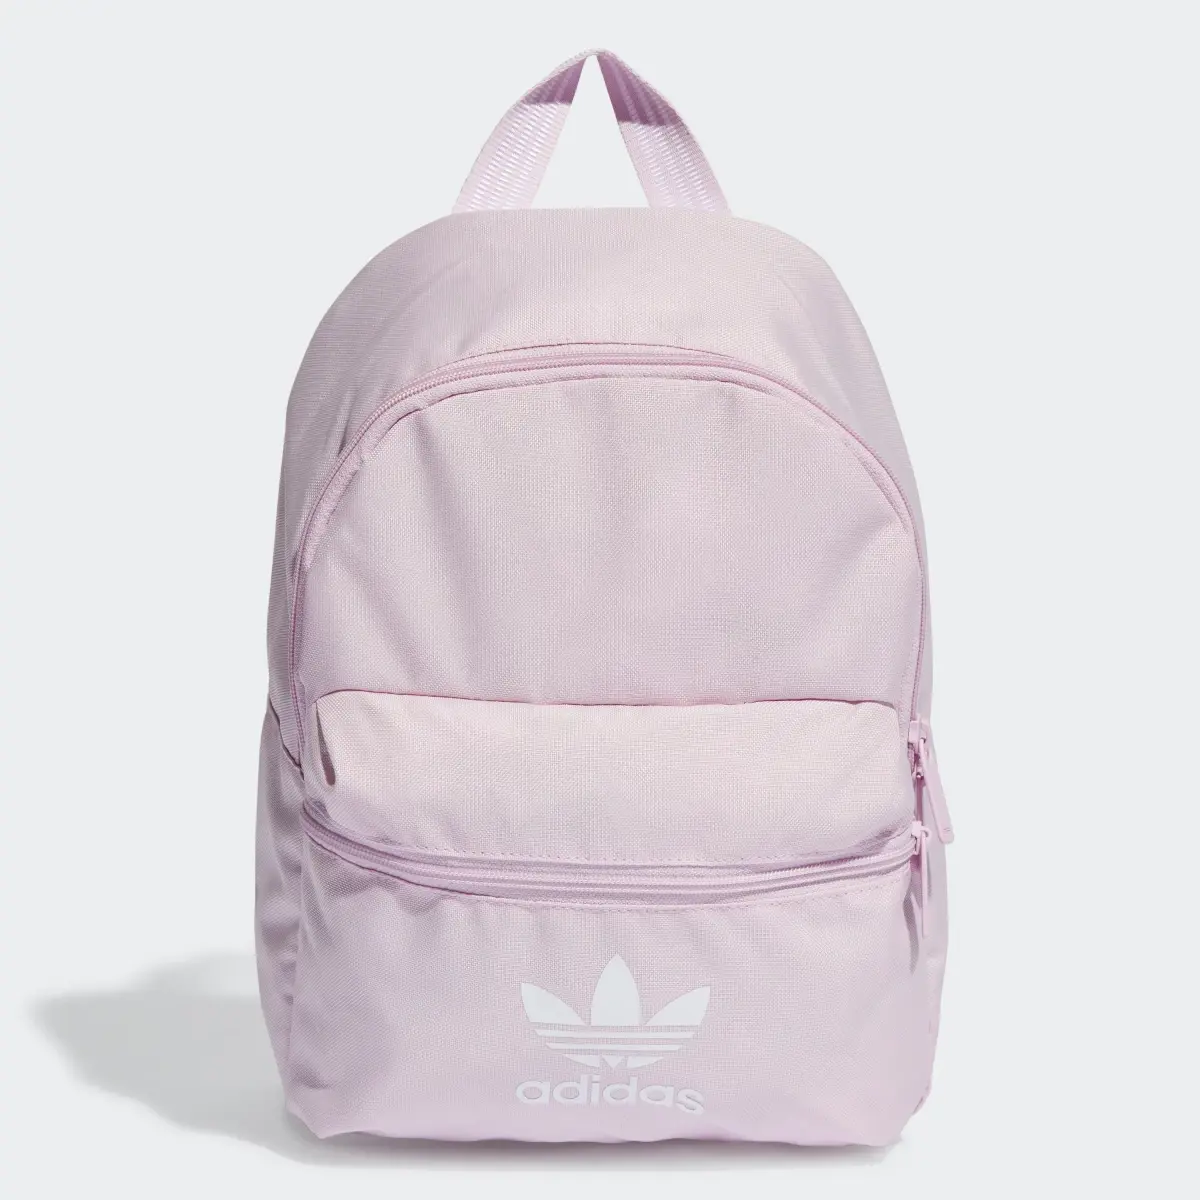 Adidas Small Adicolor Classic Backpack. 2